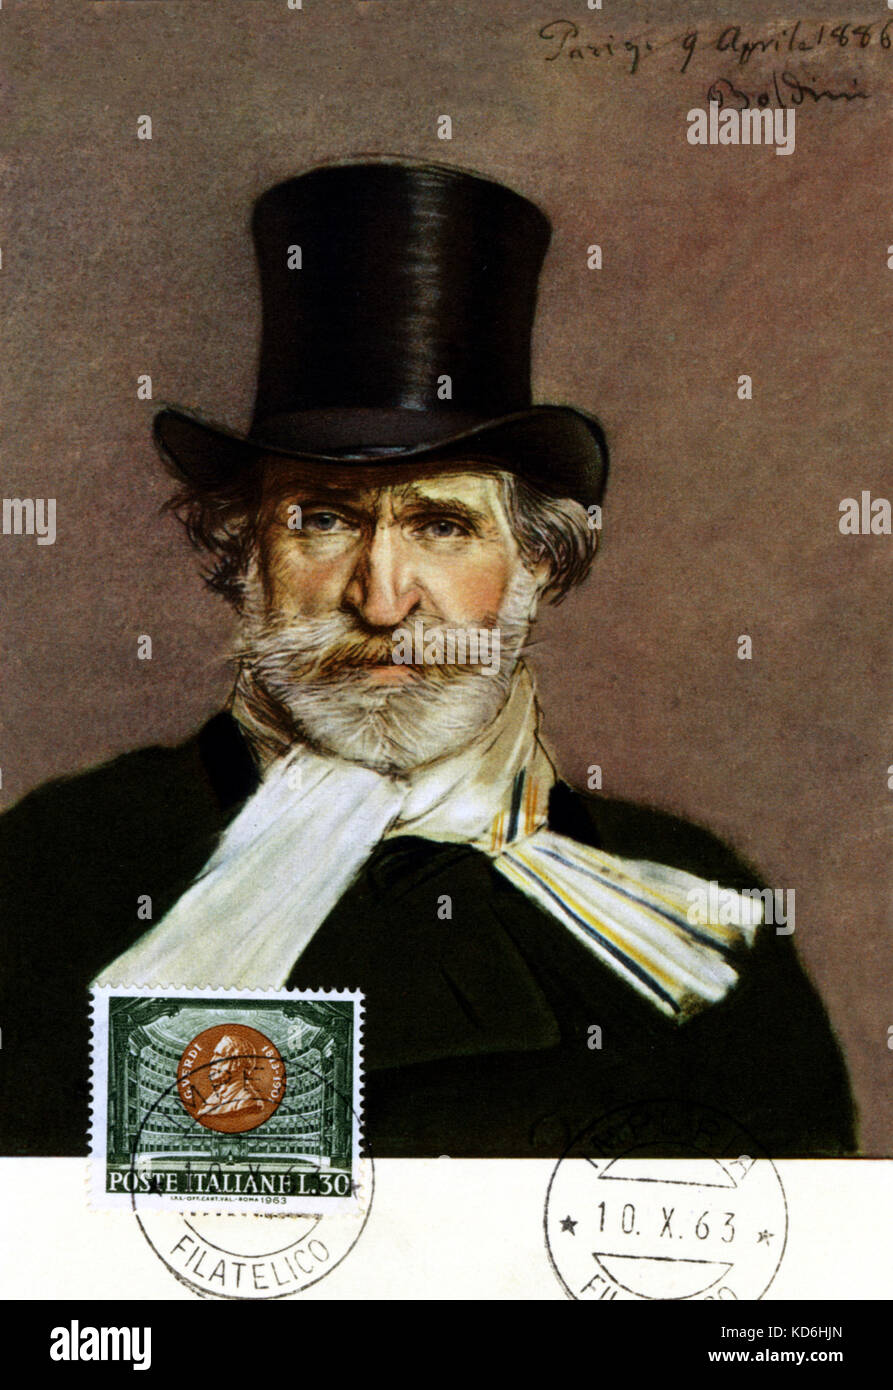 Giuseppe Verdi portrait by Boldini (1845-1931) dated Paris, 9th April 1886 as First Day Cover stamp issued on 10th October 1963.   Italian composer 1813-1901. Stock Photo